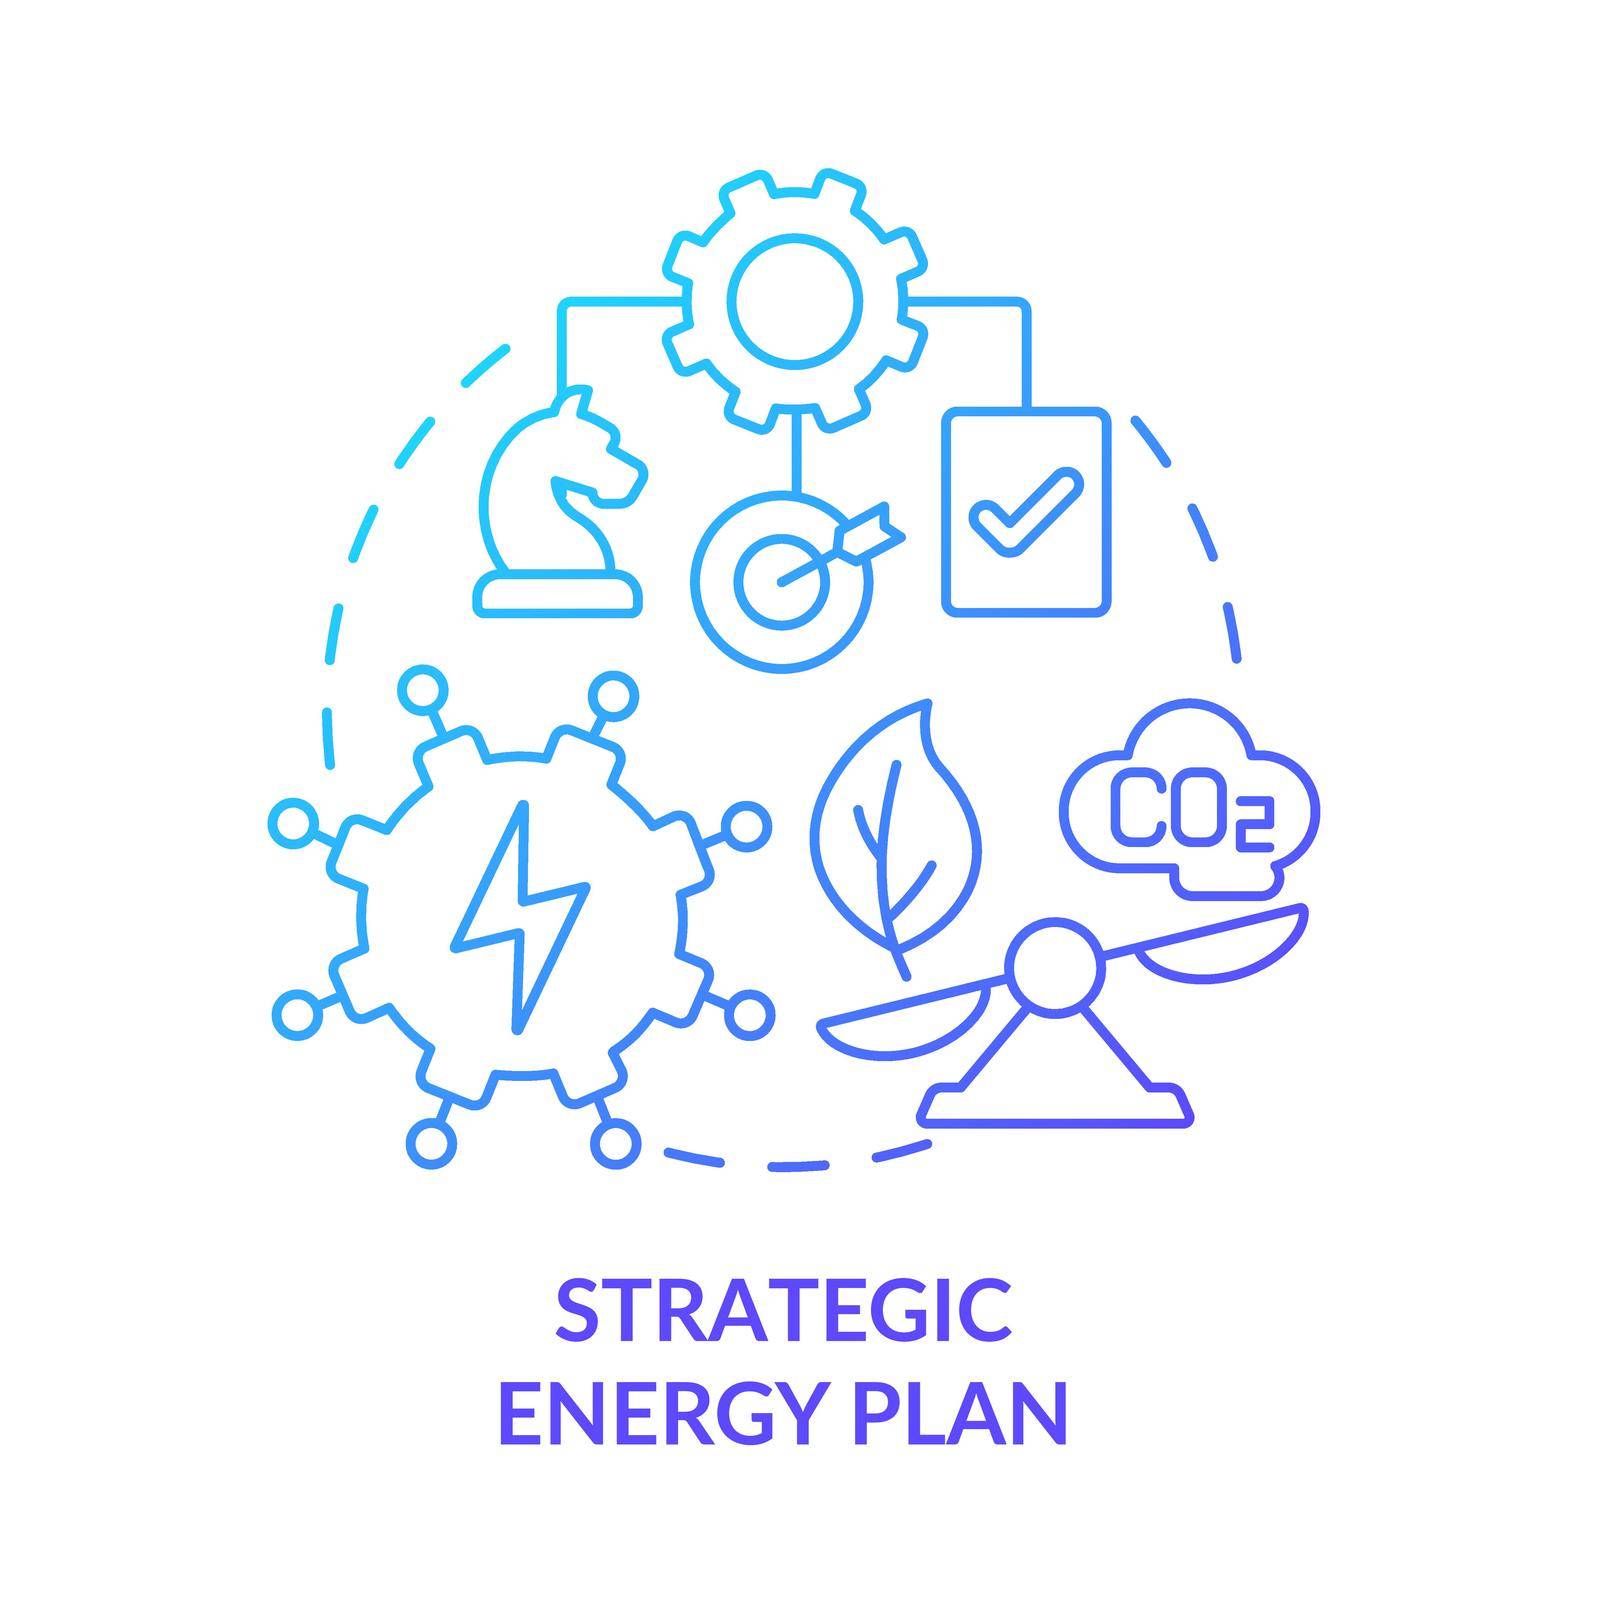 Strategic energy plan blue gradient concept icon by bsd